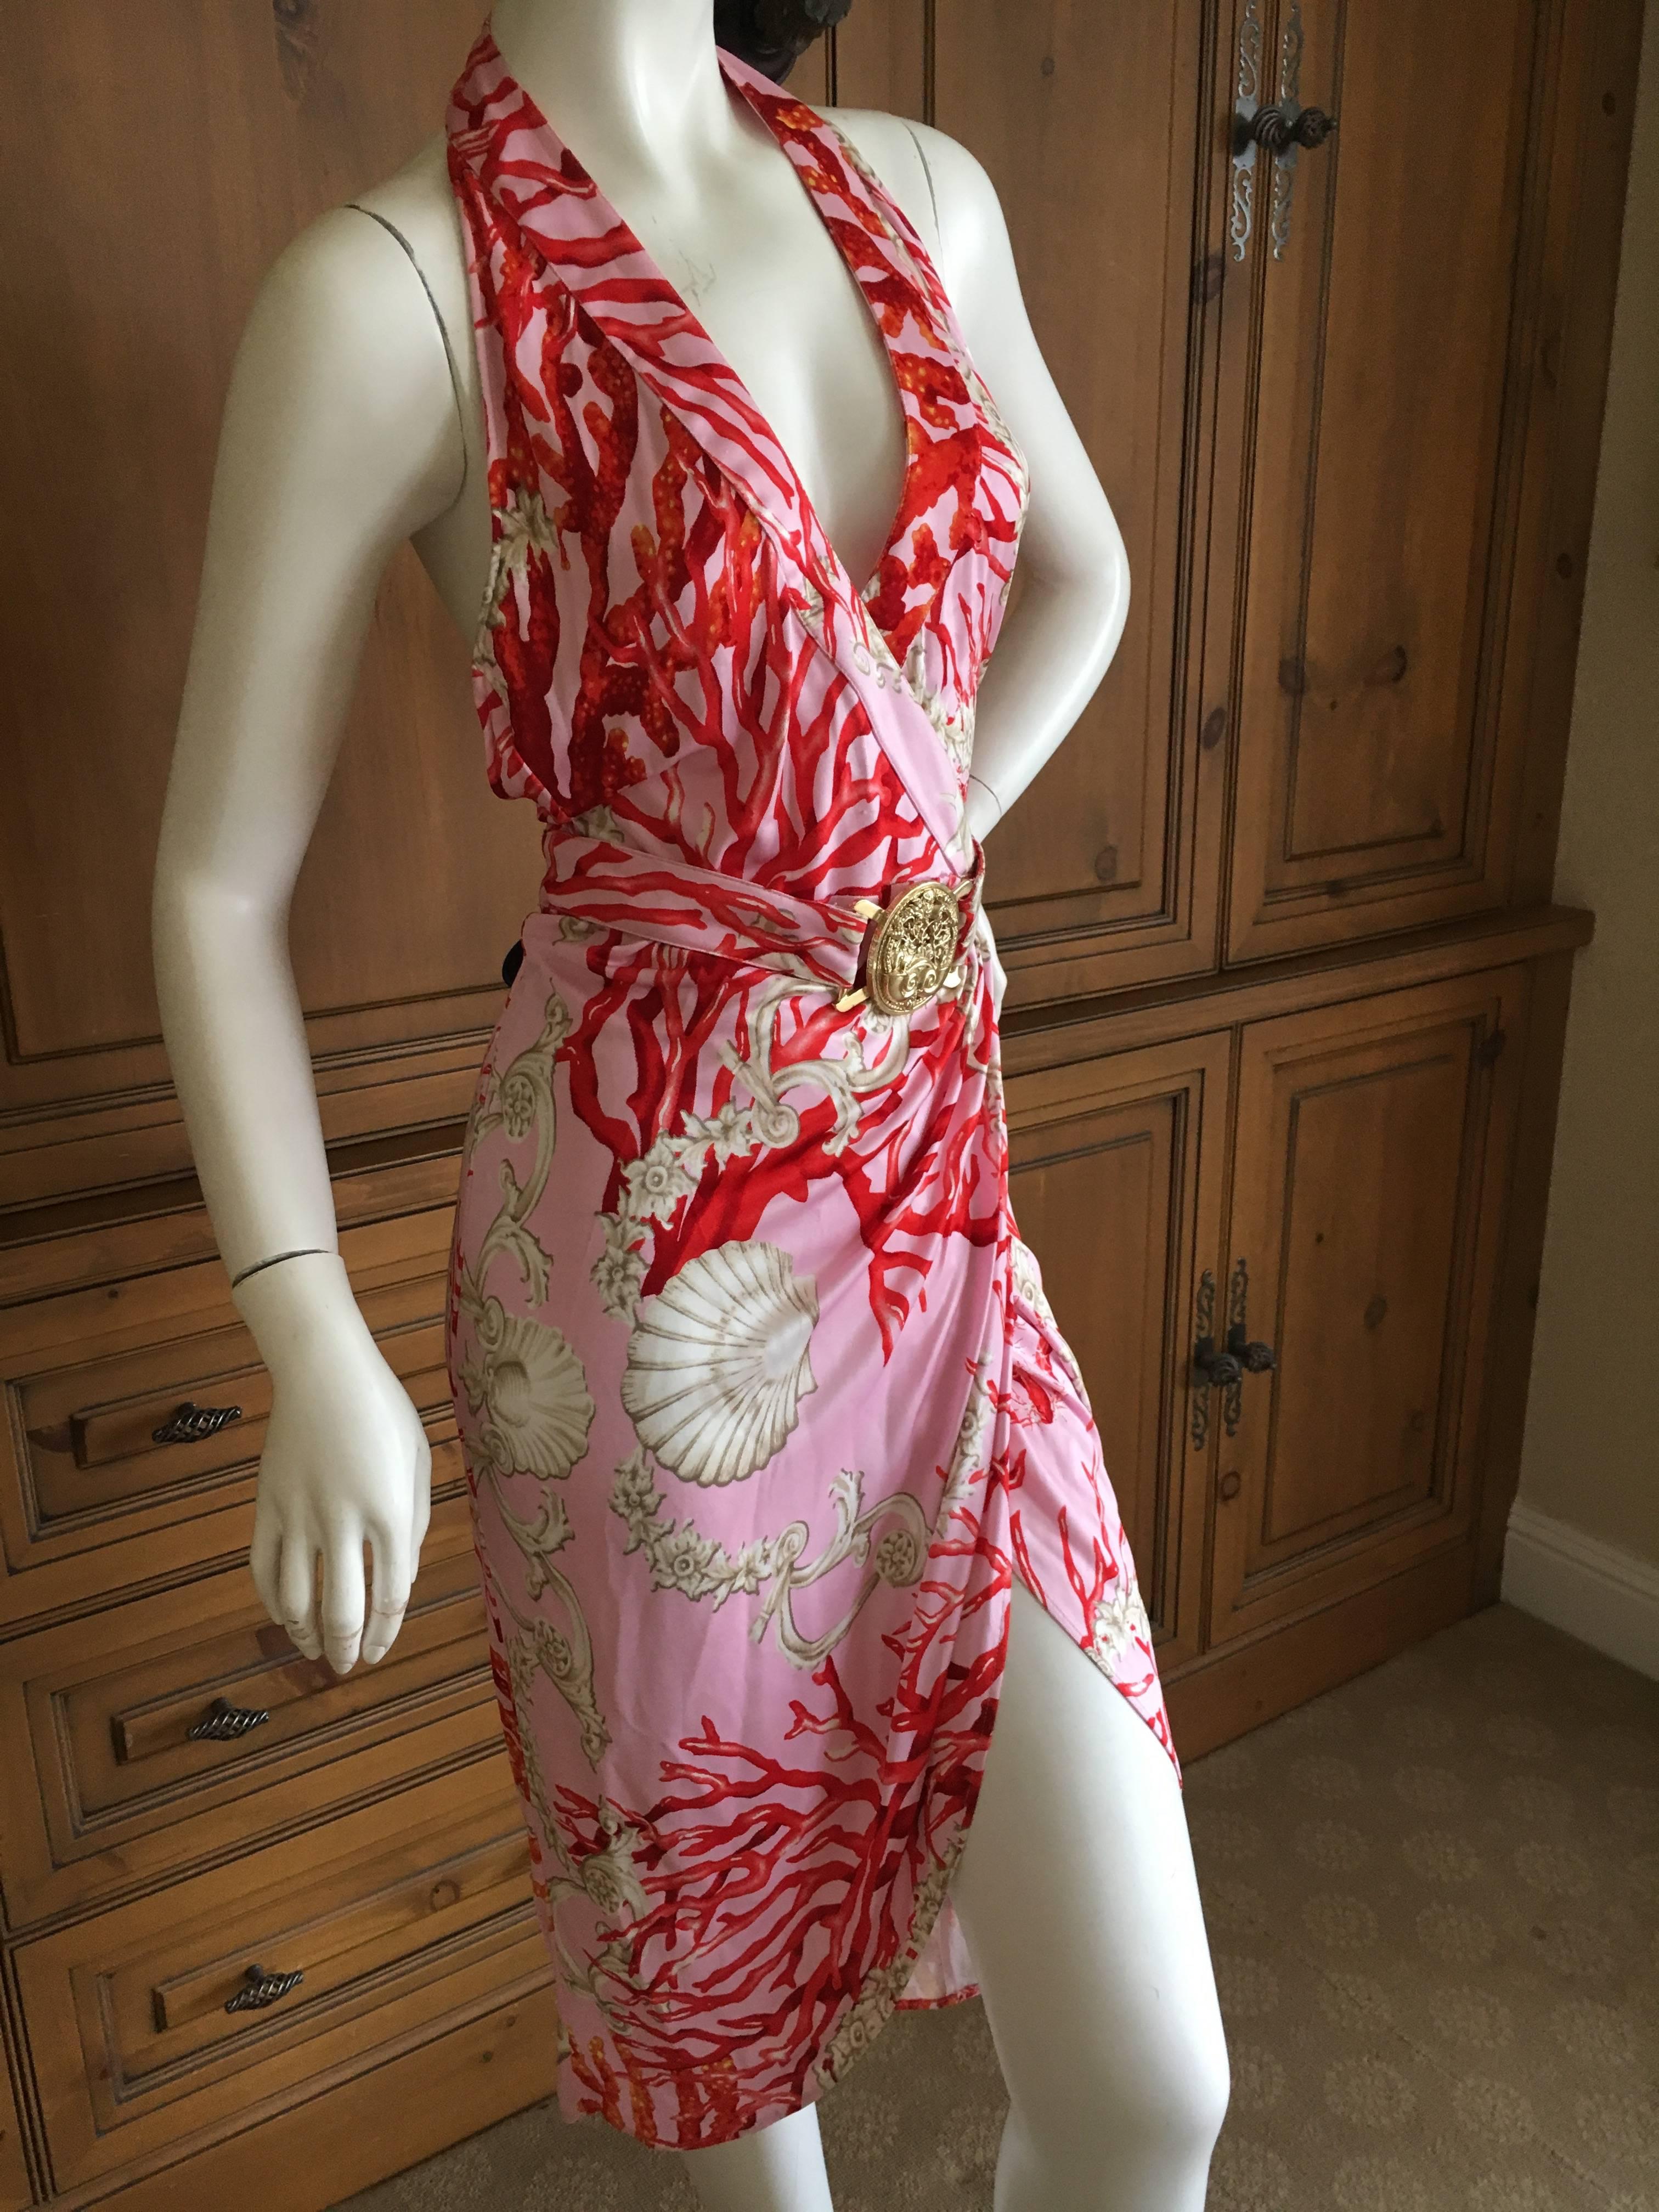 Versace Vintage Coral and Shell Print Halter Dress with Bold Gold Medallion Belt. .
Wrap style.
Viscose .
Size 42
Bust 38